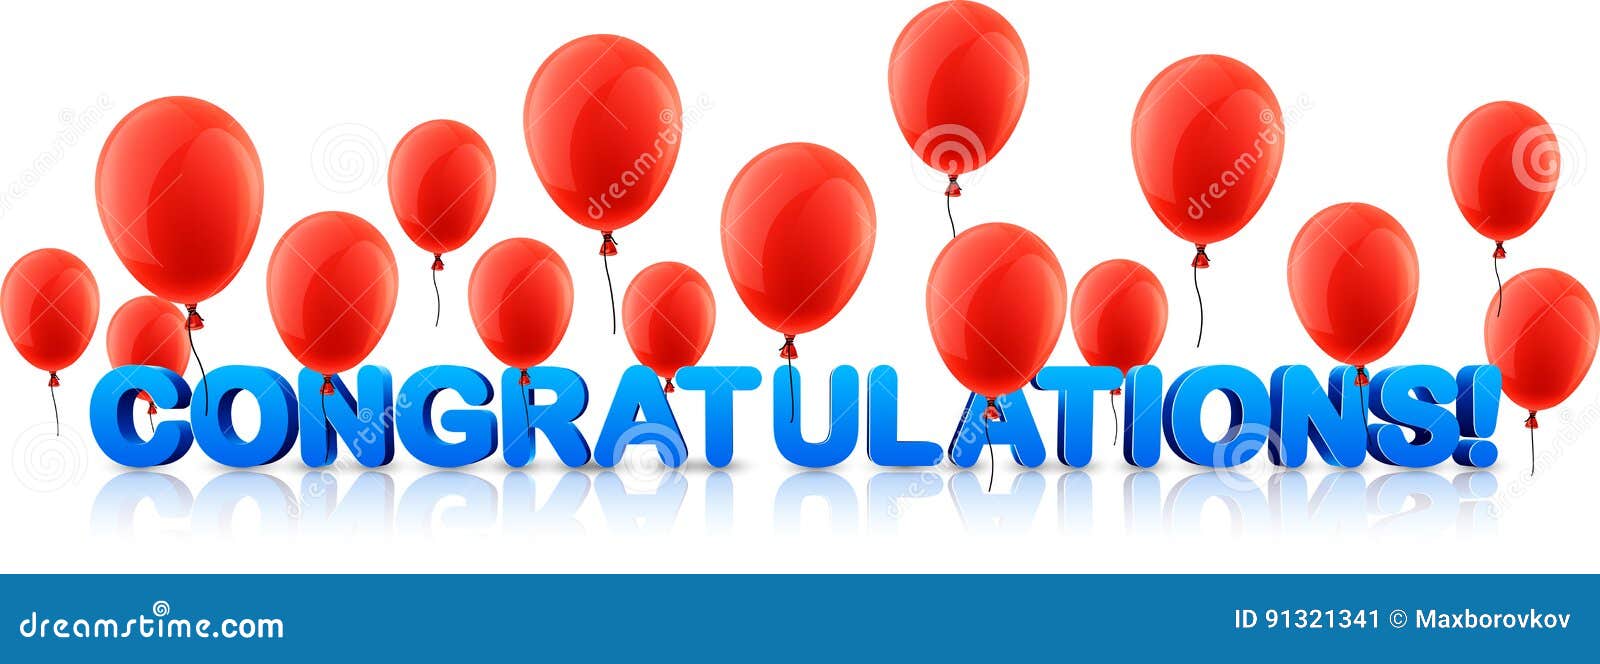 Congratulations Balloons 3d Background Royalty Free Stock Photo